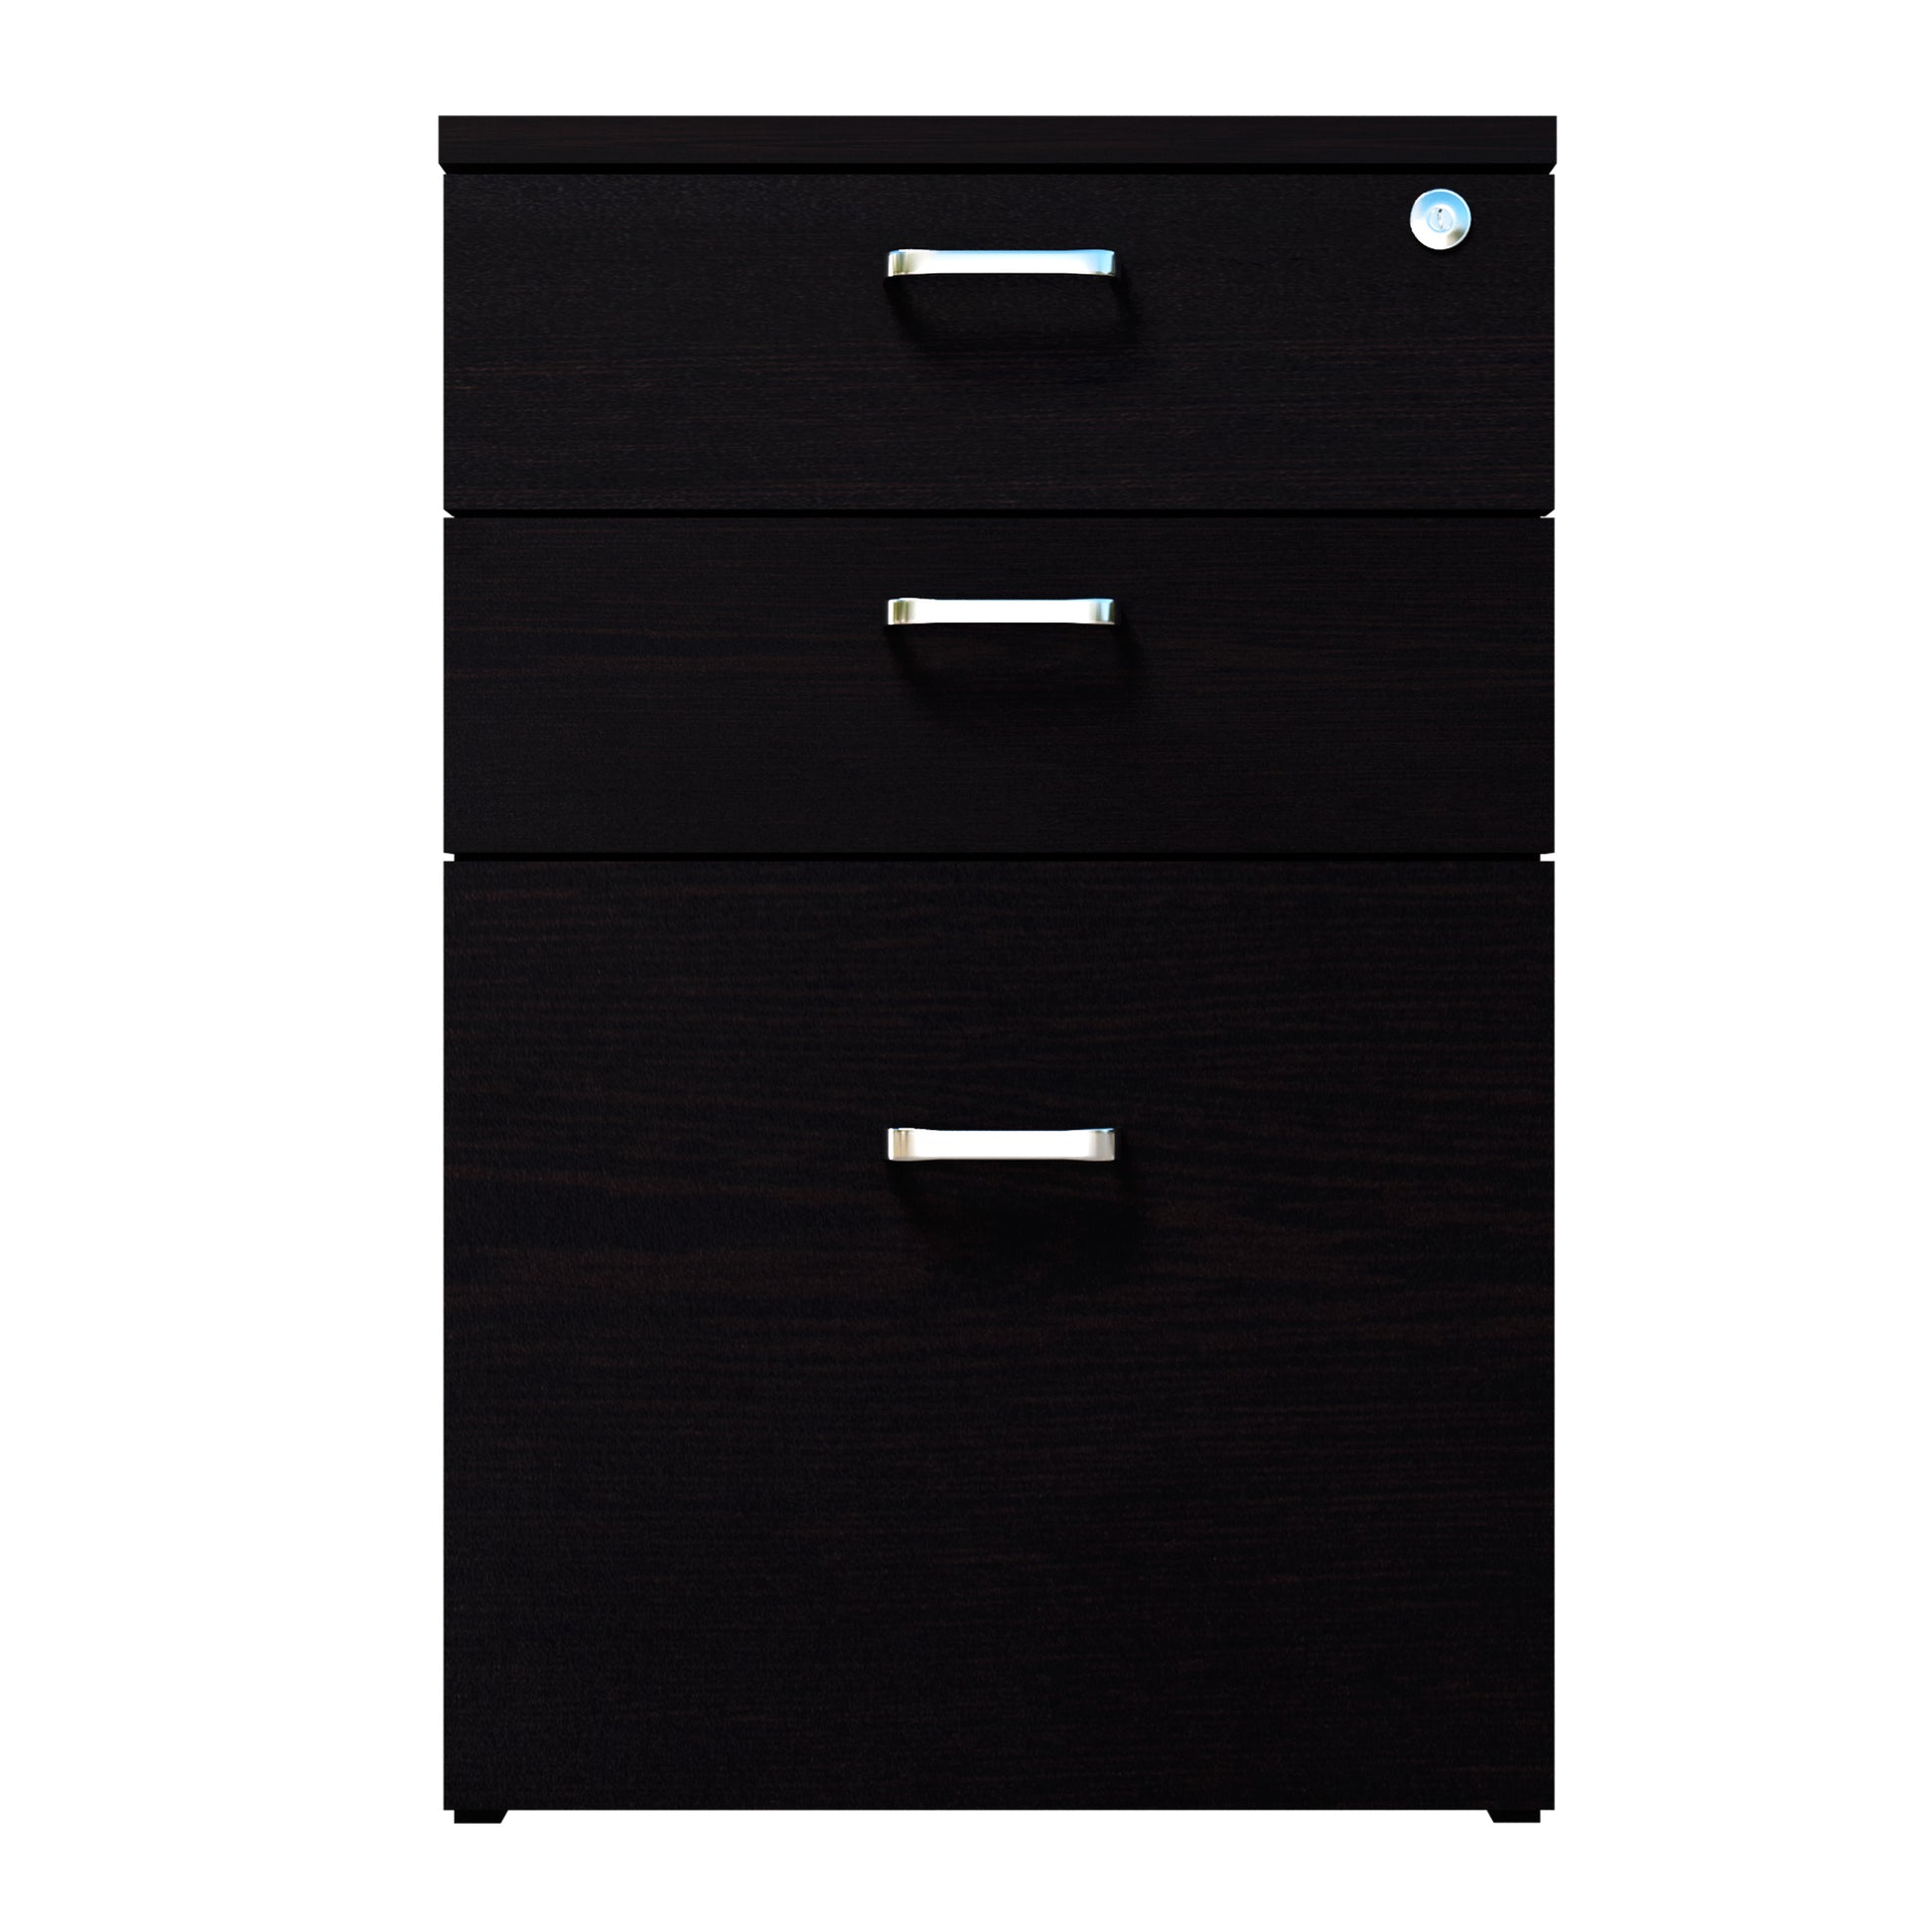 Pedestal 3 Drawer unit with smart lock  (Suede Finish , Frosty white and Wenge ) piedestal Drawer Units VIKI FURNITURE   